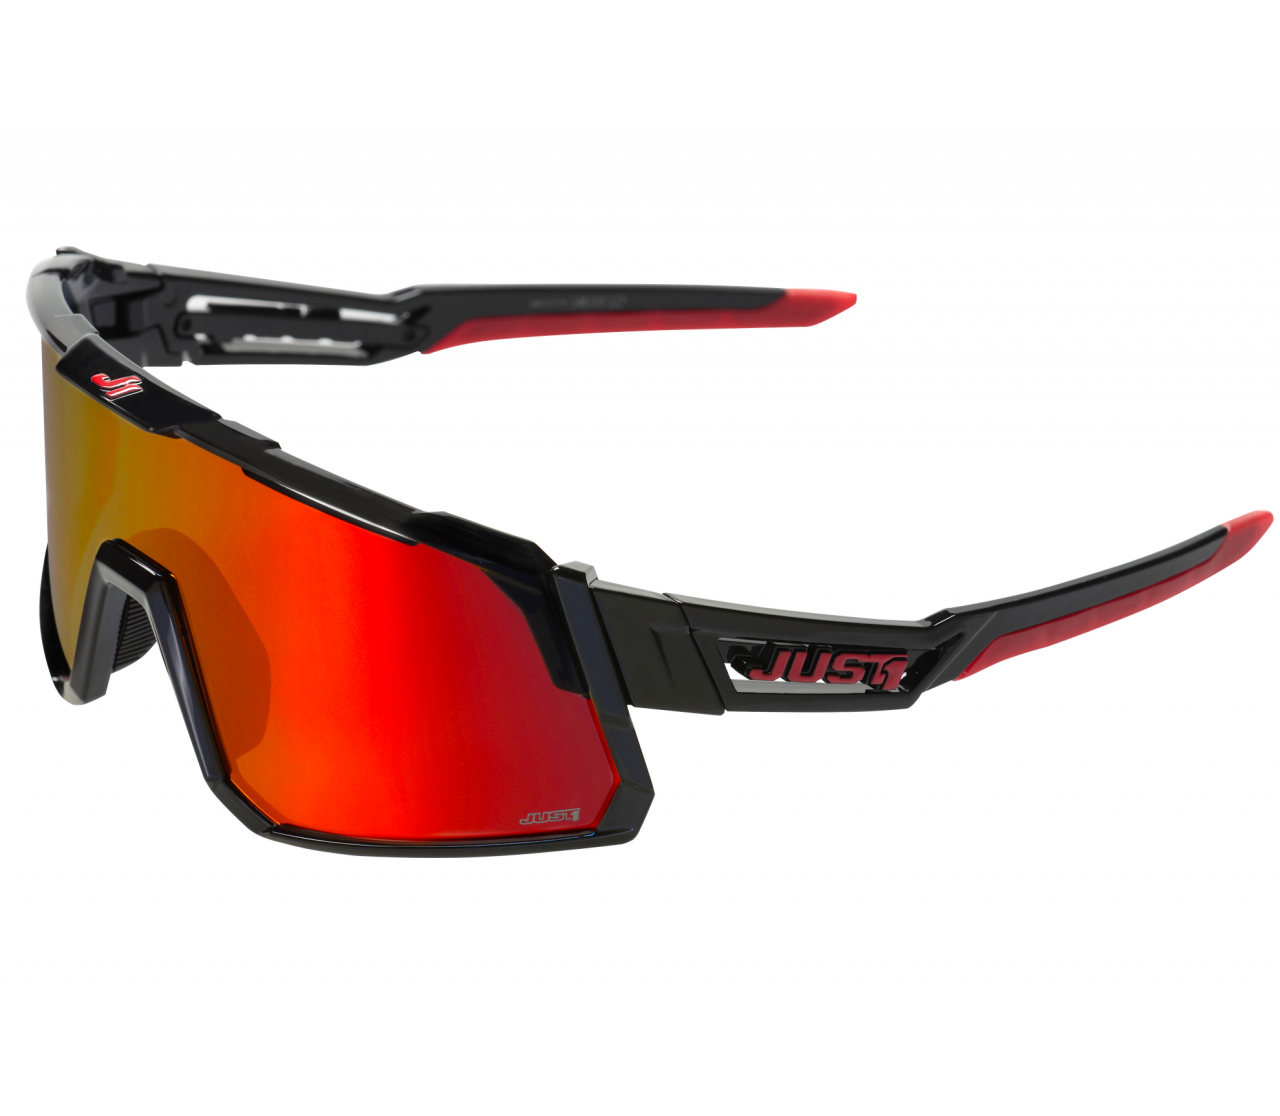 JUST1 SNIPER BLACK-RED with red mirror lens